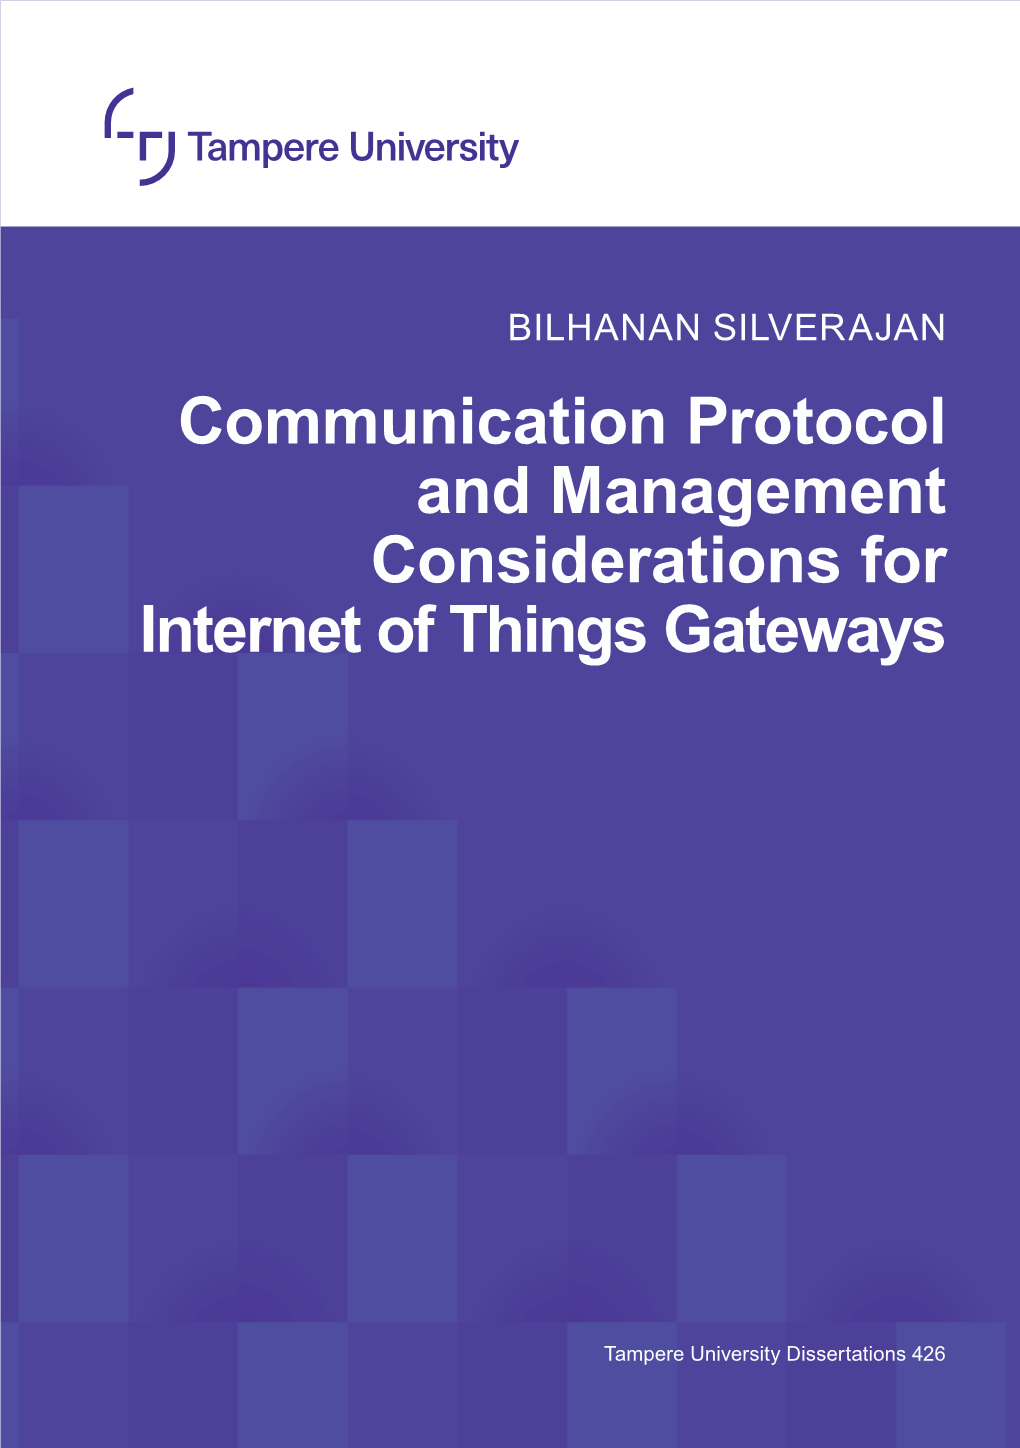 Communication Protocol and Management Considerations for Internet of Things Gateways